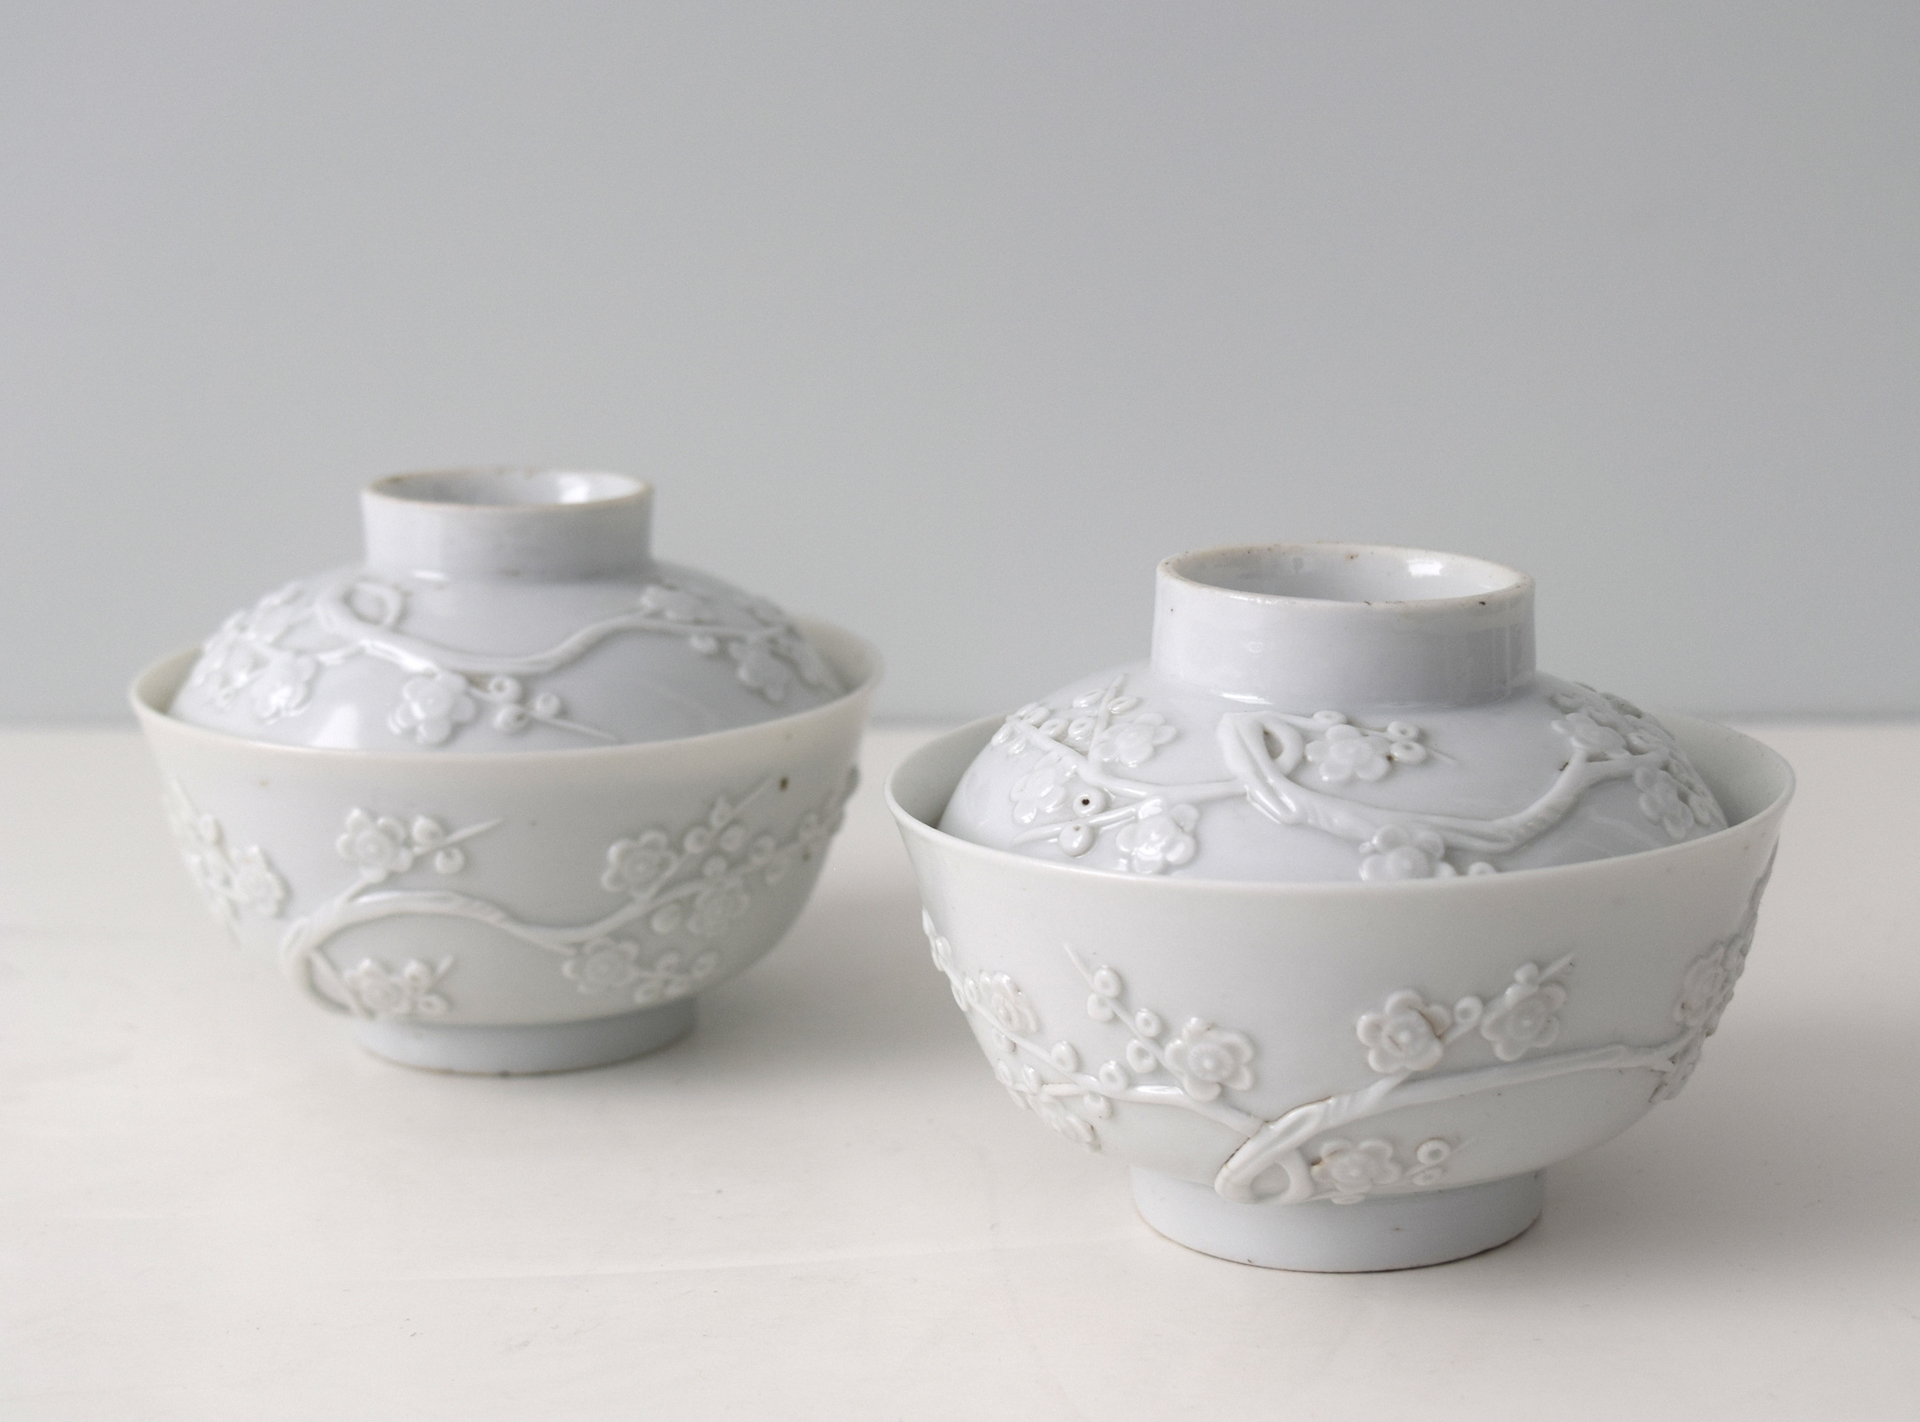 PAIR OF BLANC-DE-CHINE BOWLS AND COVERS WITH MOLDED PRUNUS BLOSSOMS